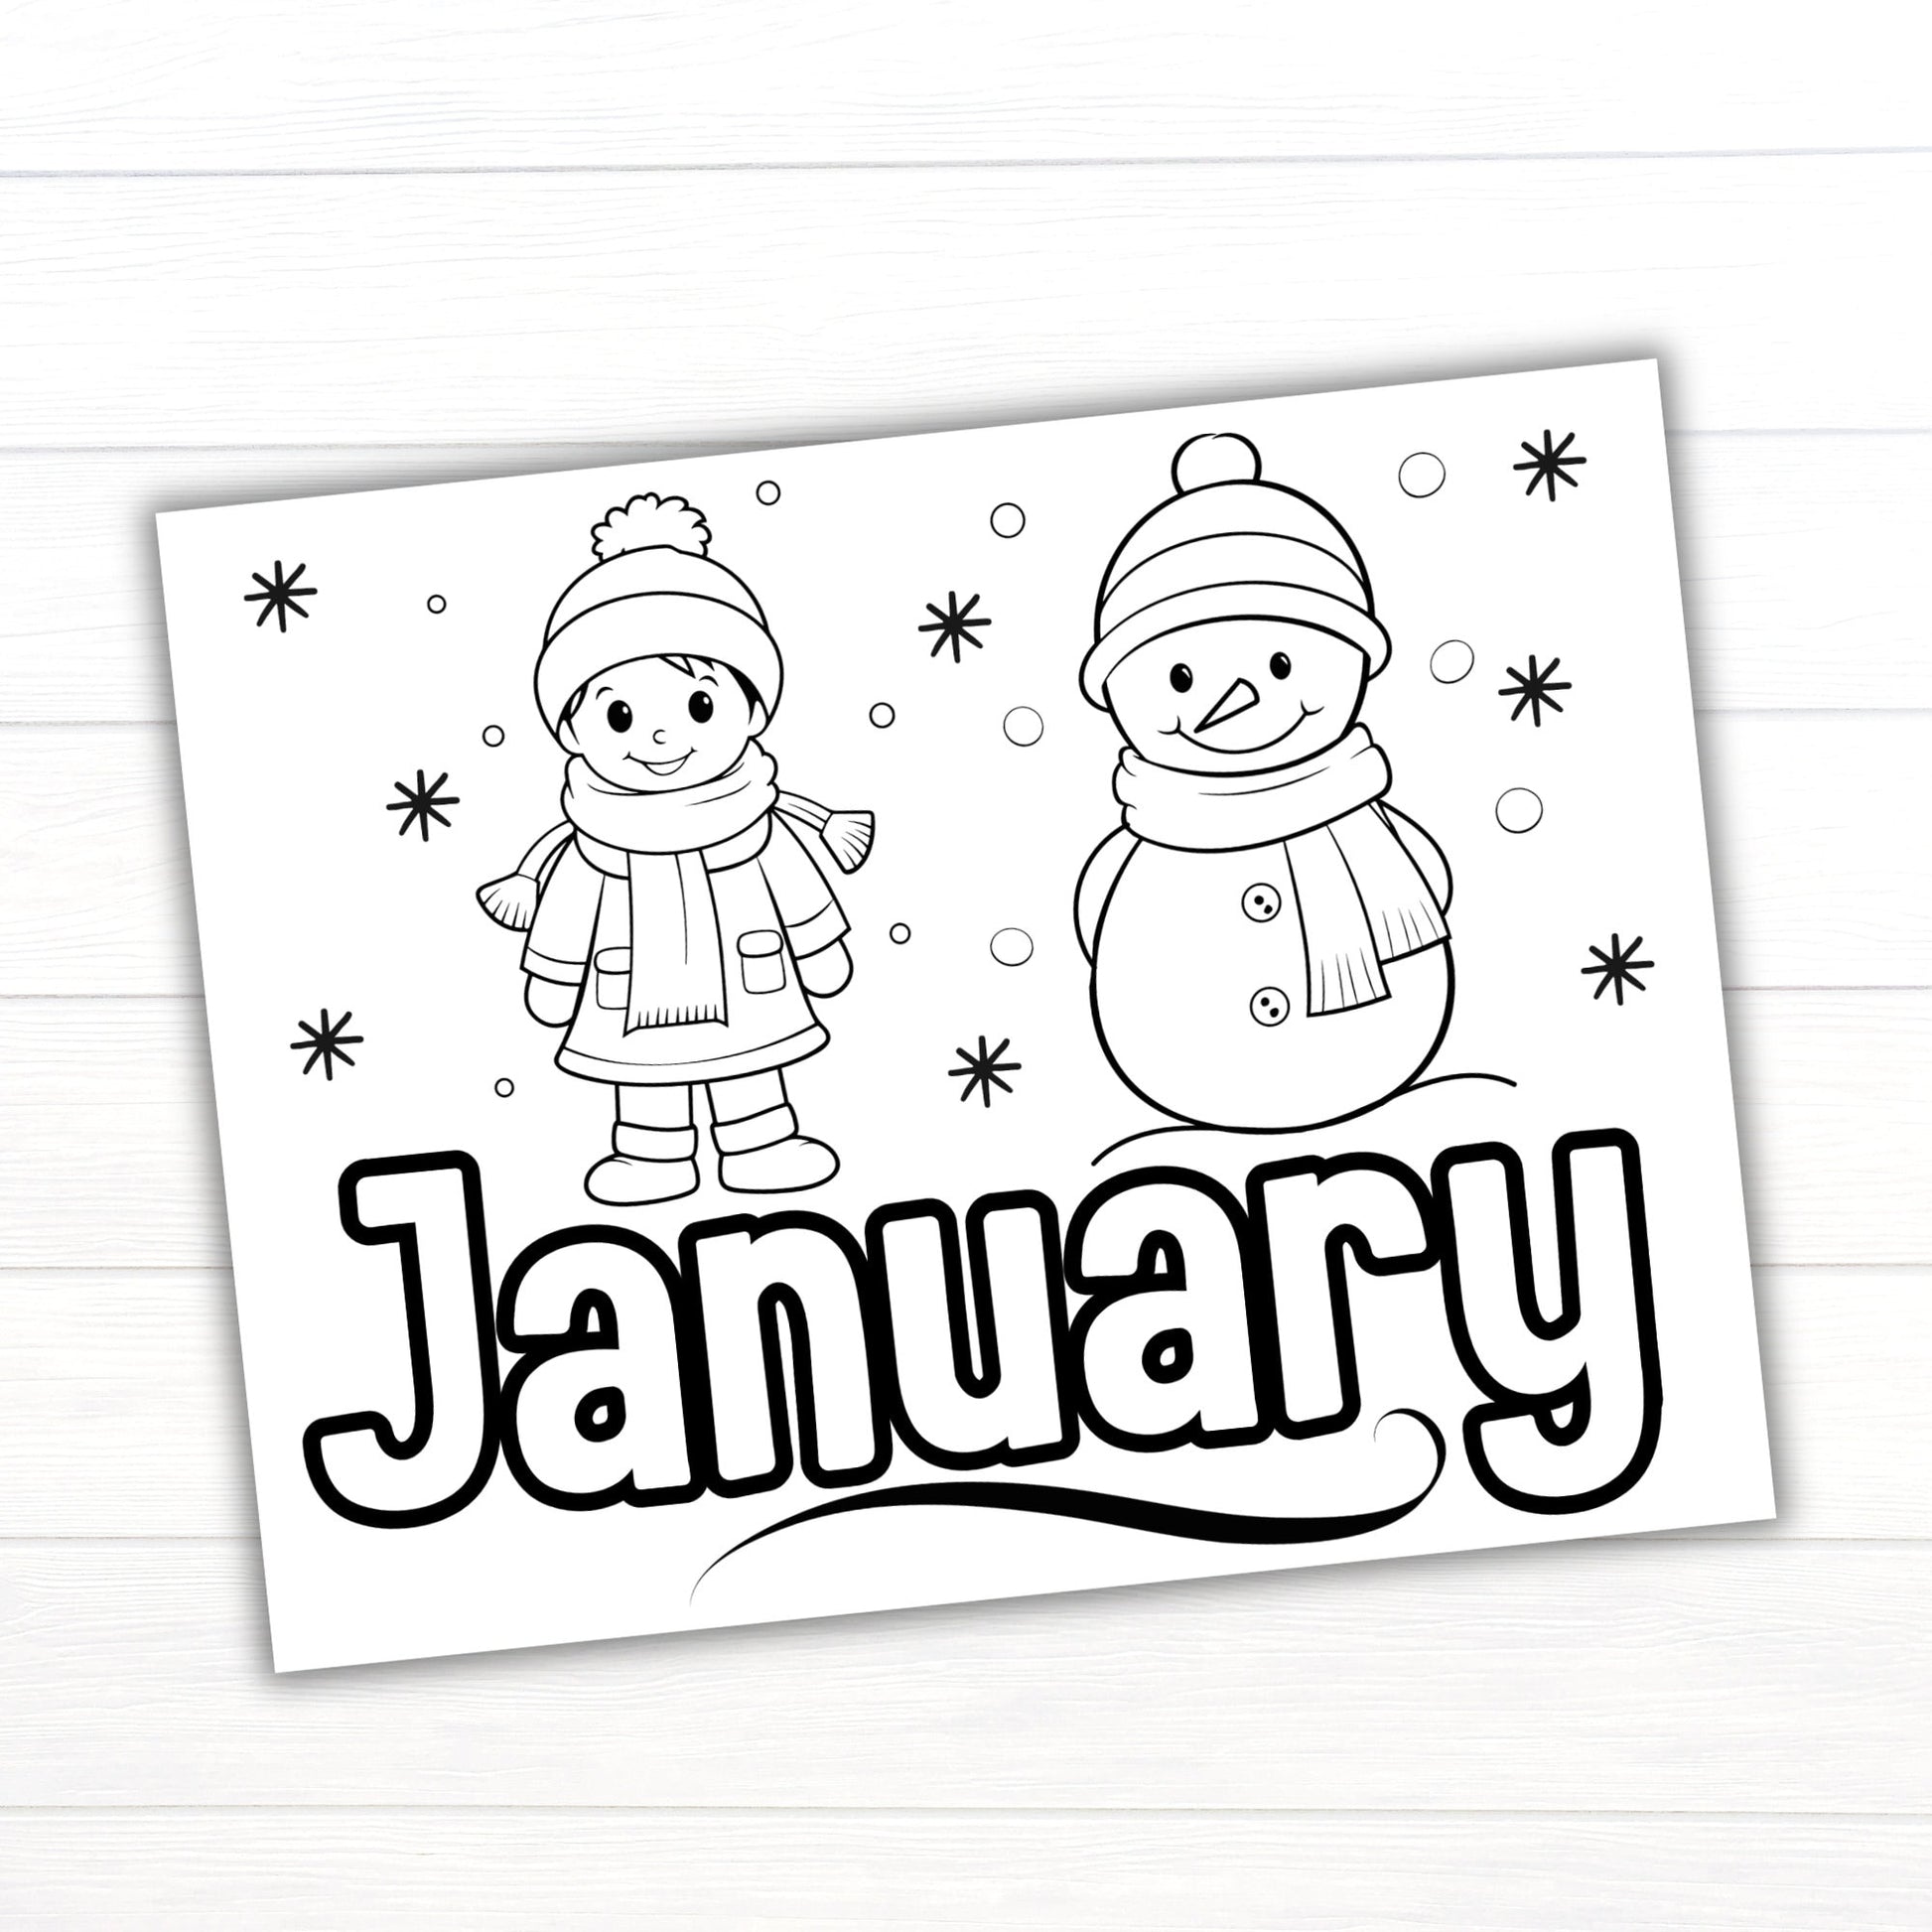 January Coloring Page, Month of January Coloring Page, Winter Coloring Pages for Kids, Printable Calendar Pages, January Activities